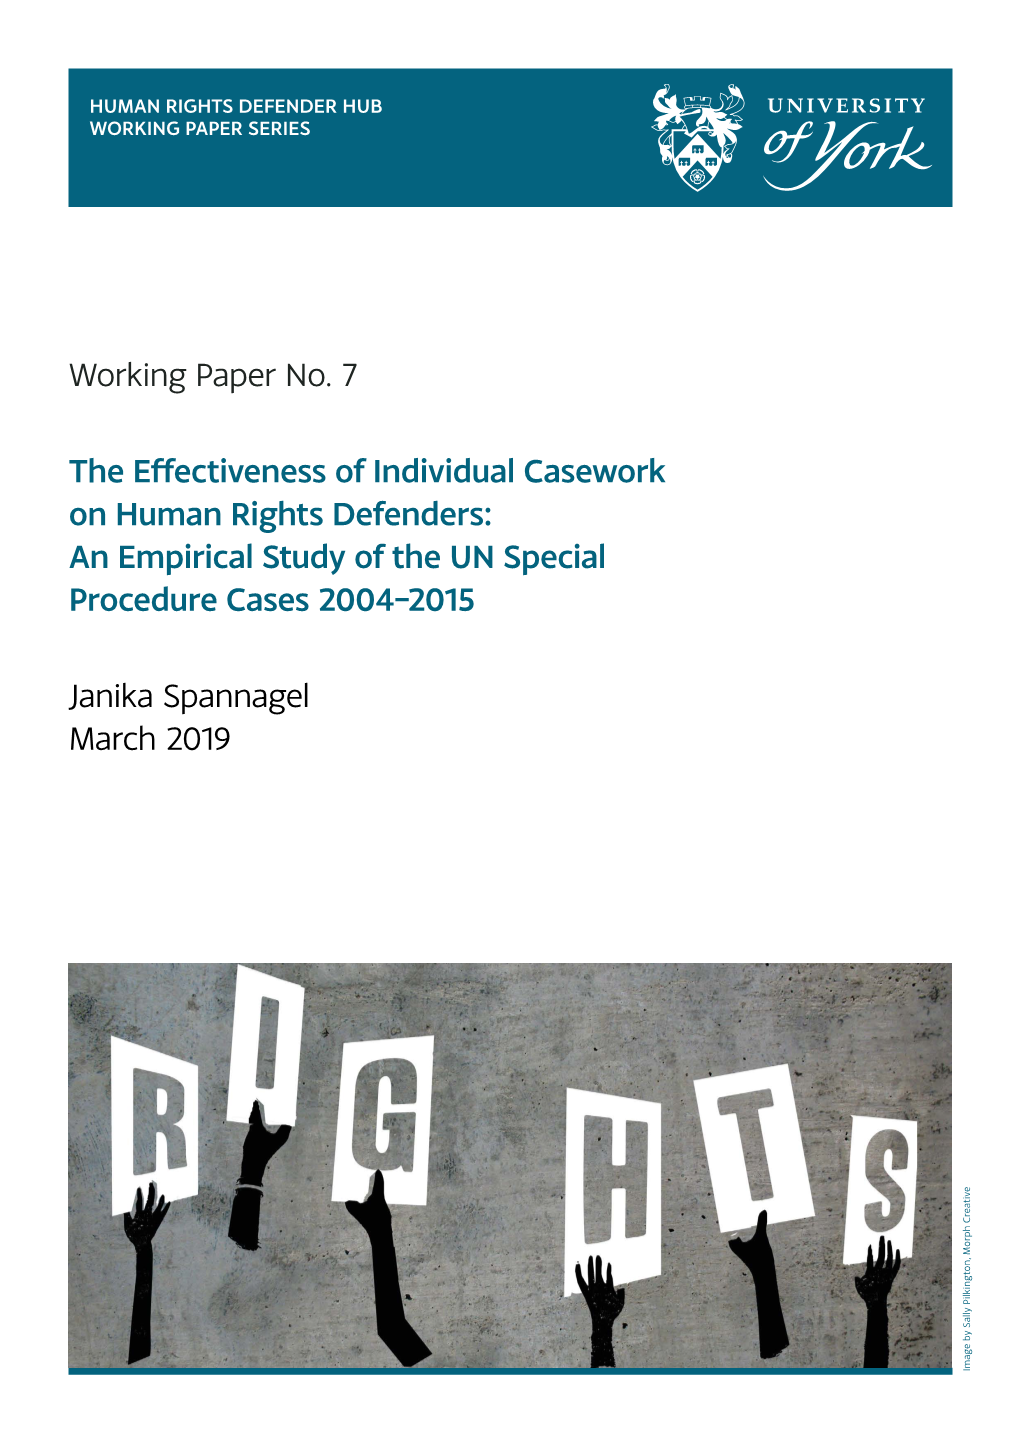 Working Paper No. 7 the Effectiveness of Individual